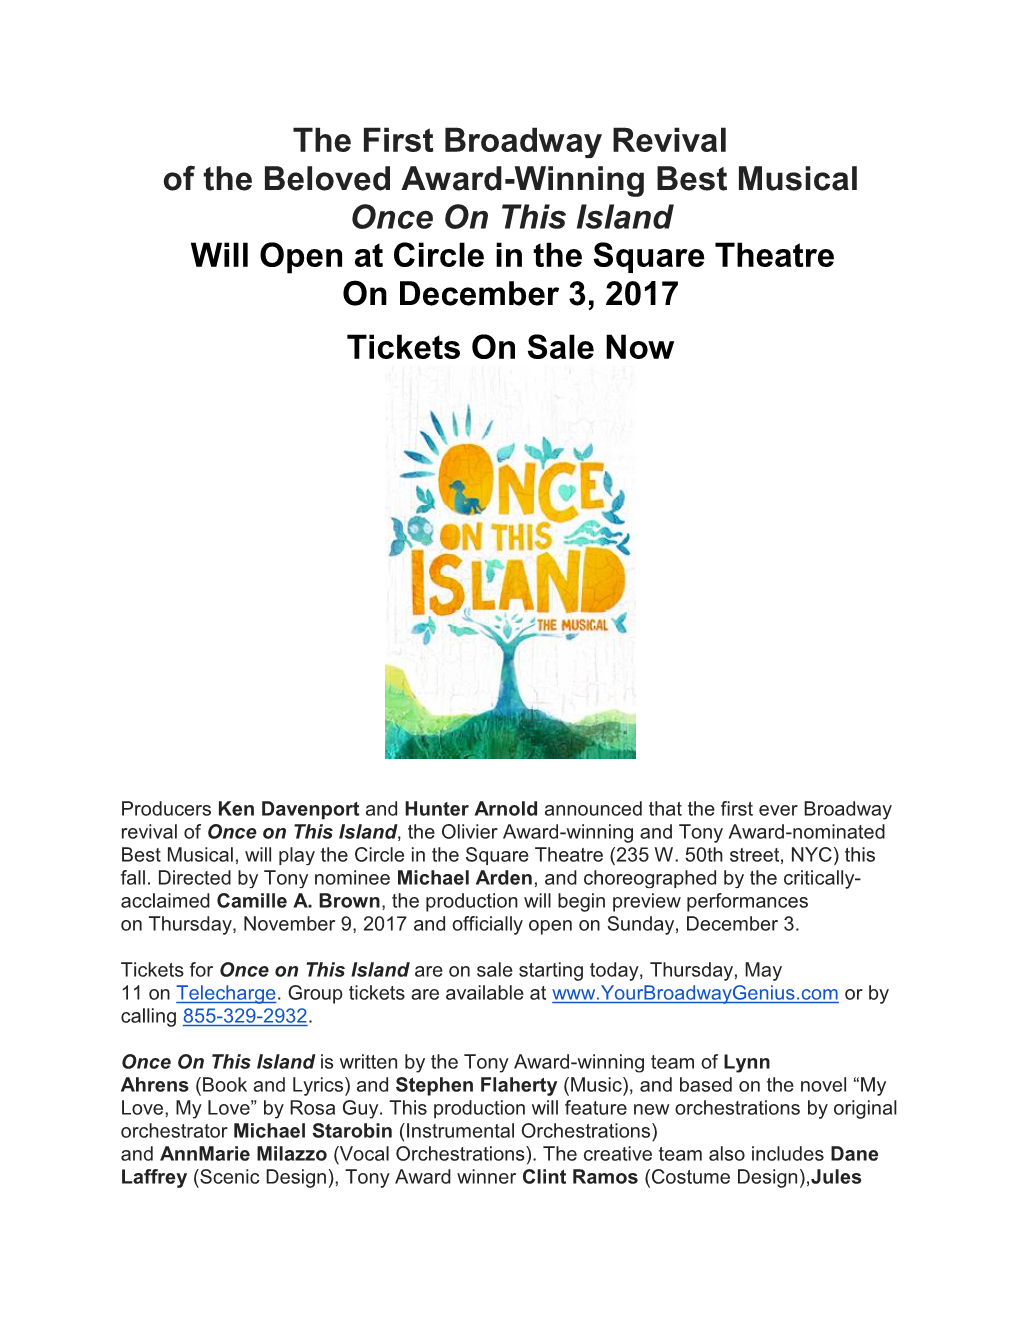 The First Broadway Revival of the Beloved Award-Winning Best Musical Once on This Island Will Open at Circle in the Square Theatre on December 3, 2017